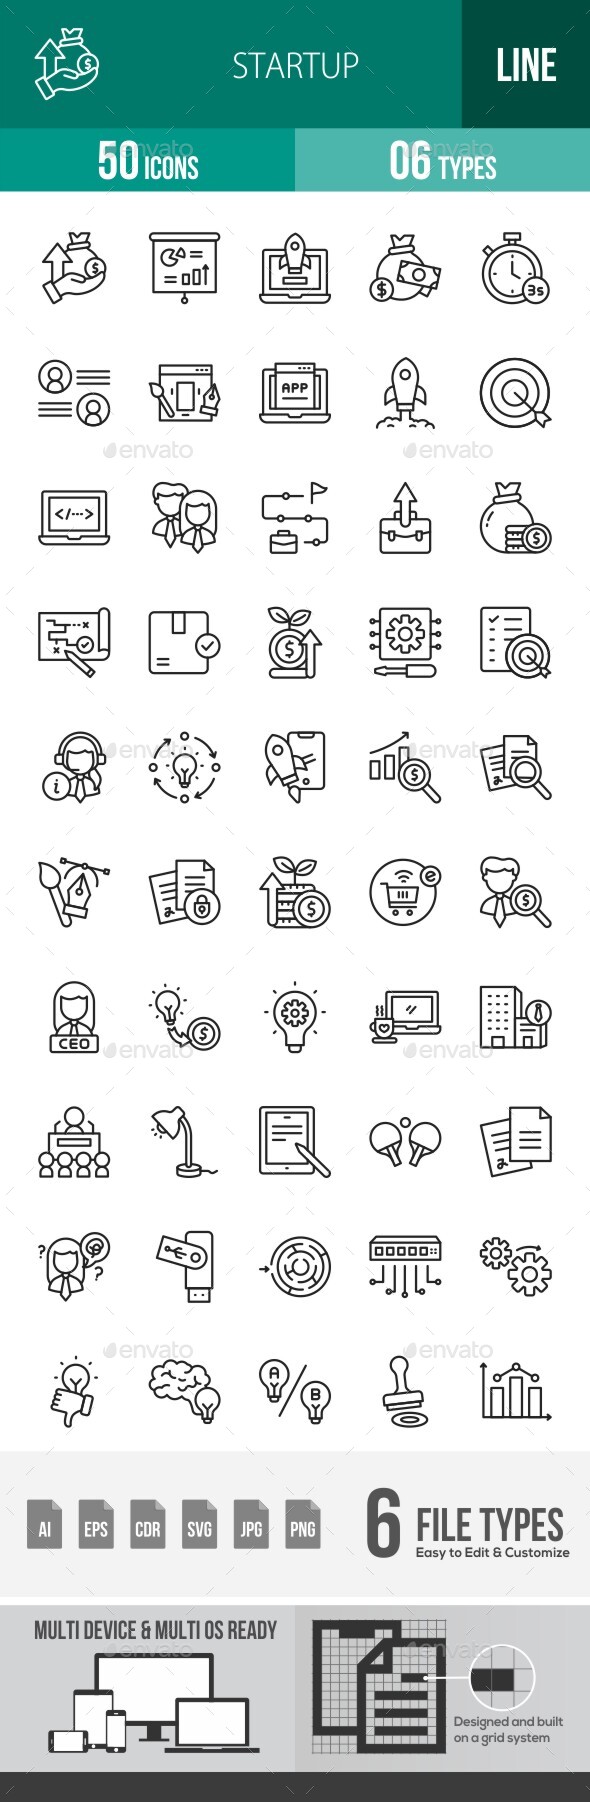 [DOWNLOAD]Startup Line Icons